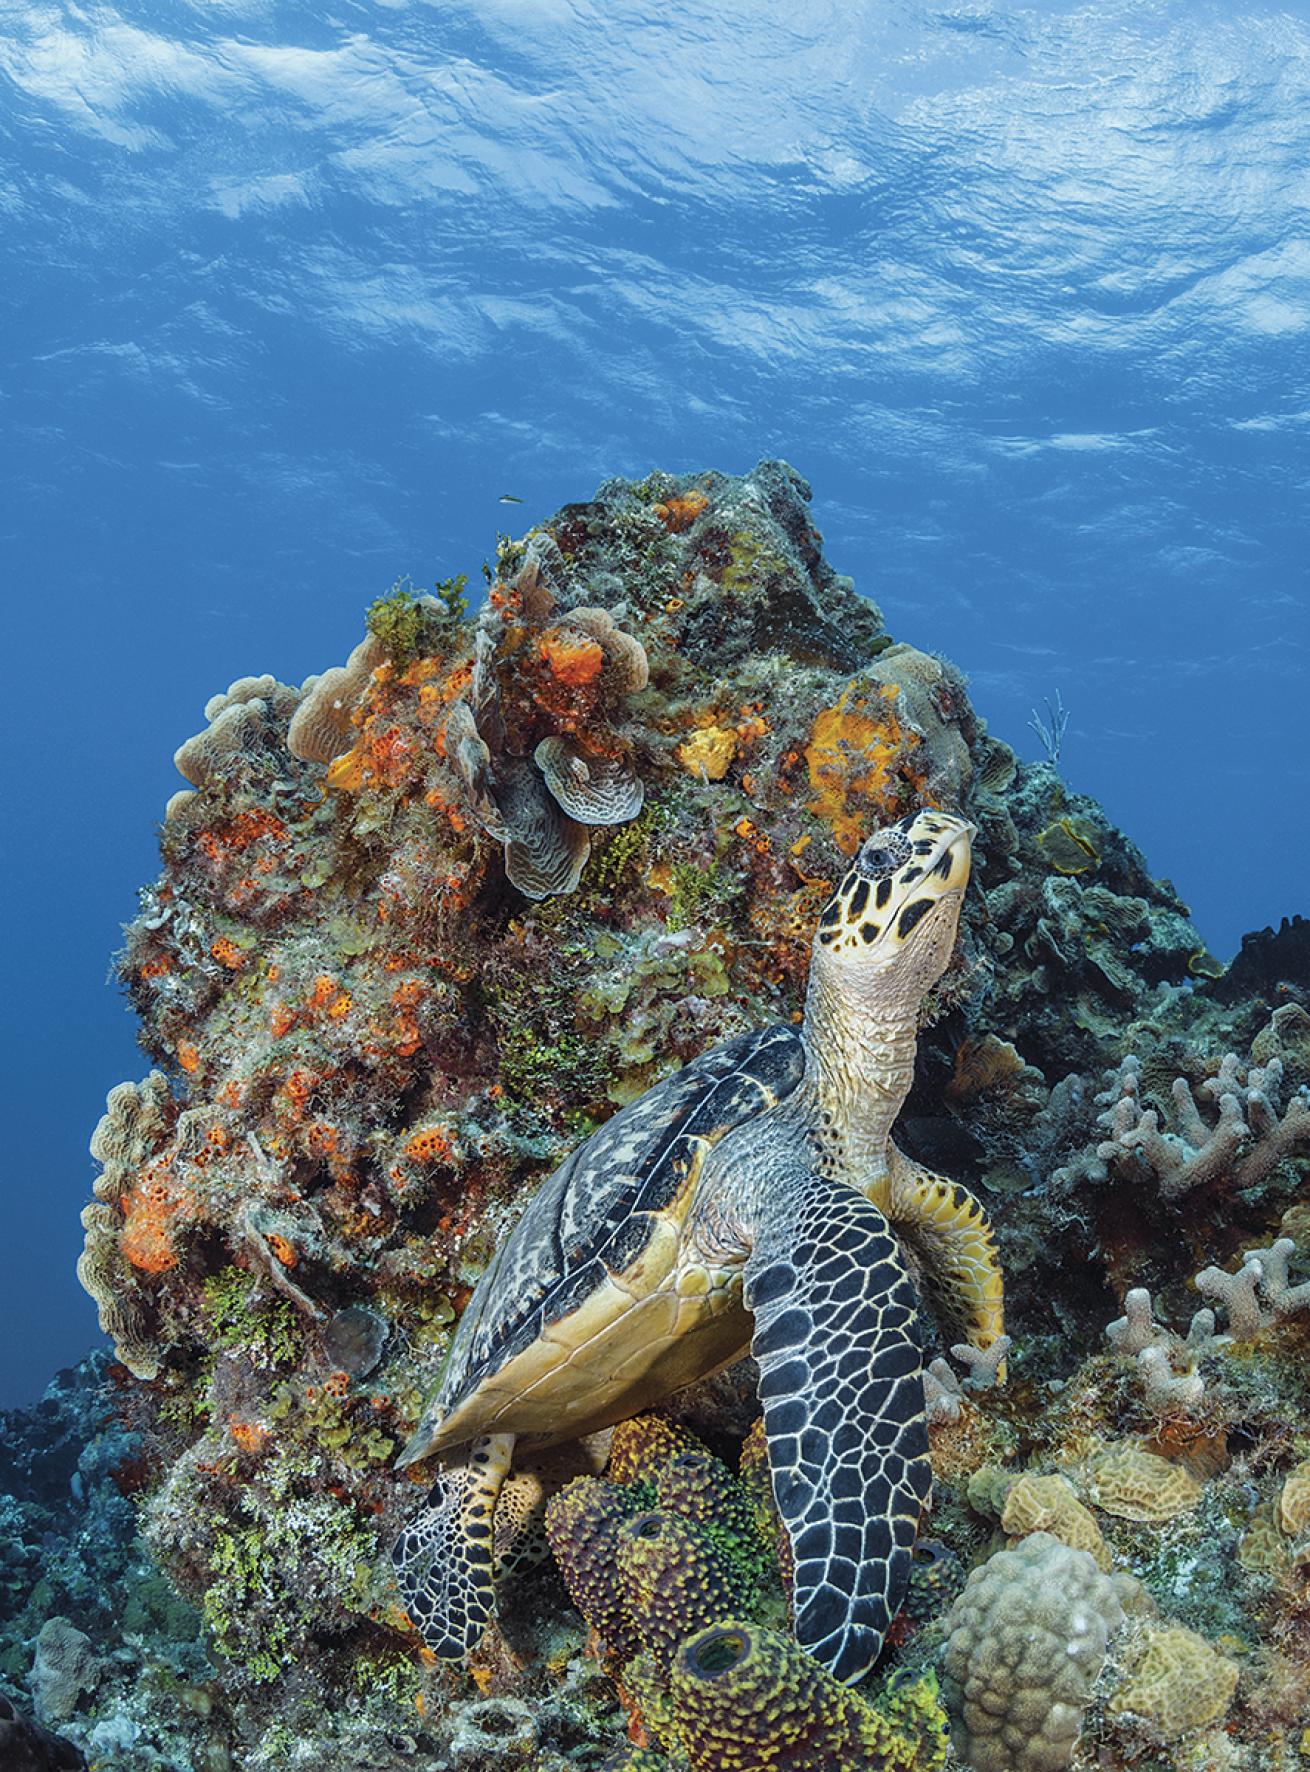 A sea turtle rests on a coral reef.